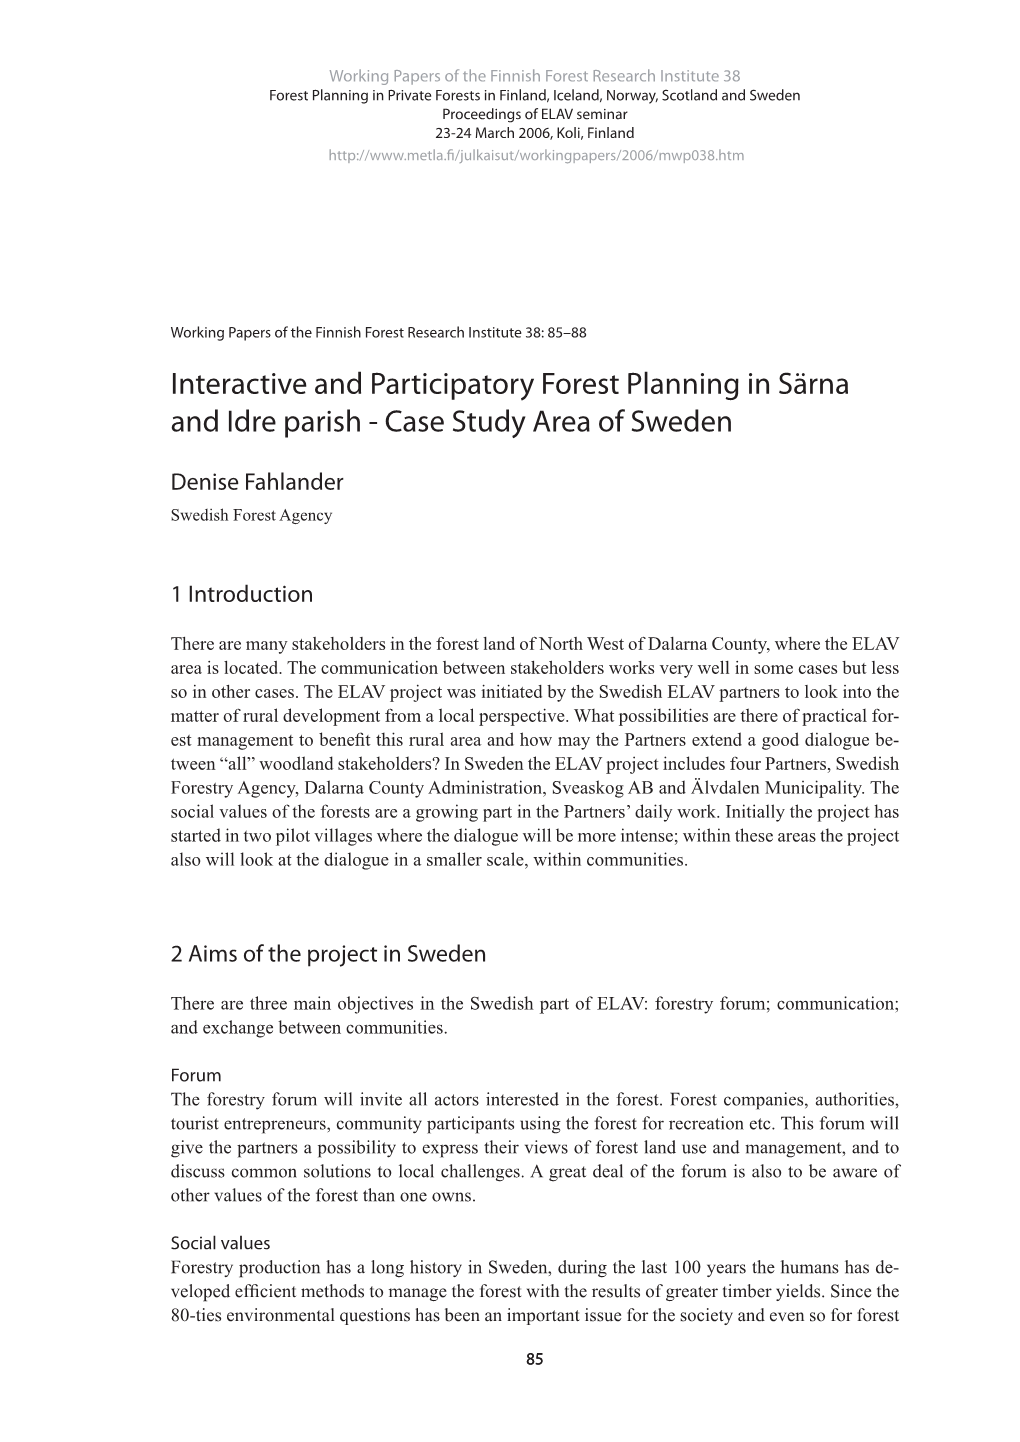 Interactive and Participatory Forest Planning in Särna and Idre Parish - Case Study Area of Sweden